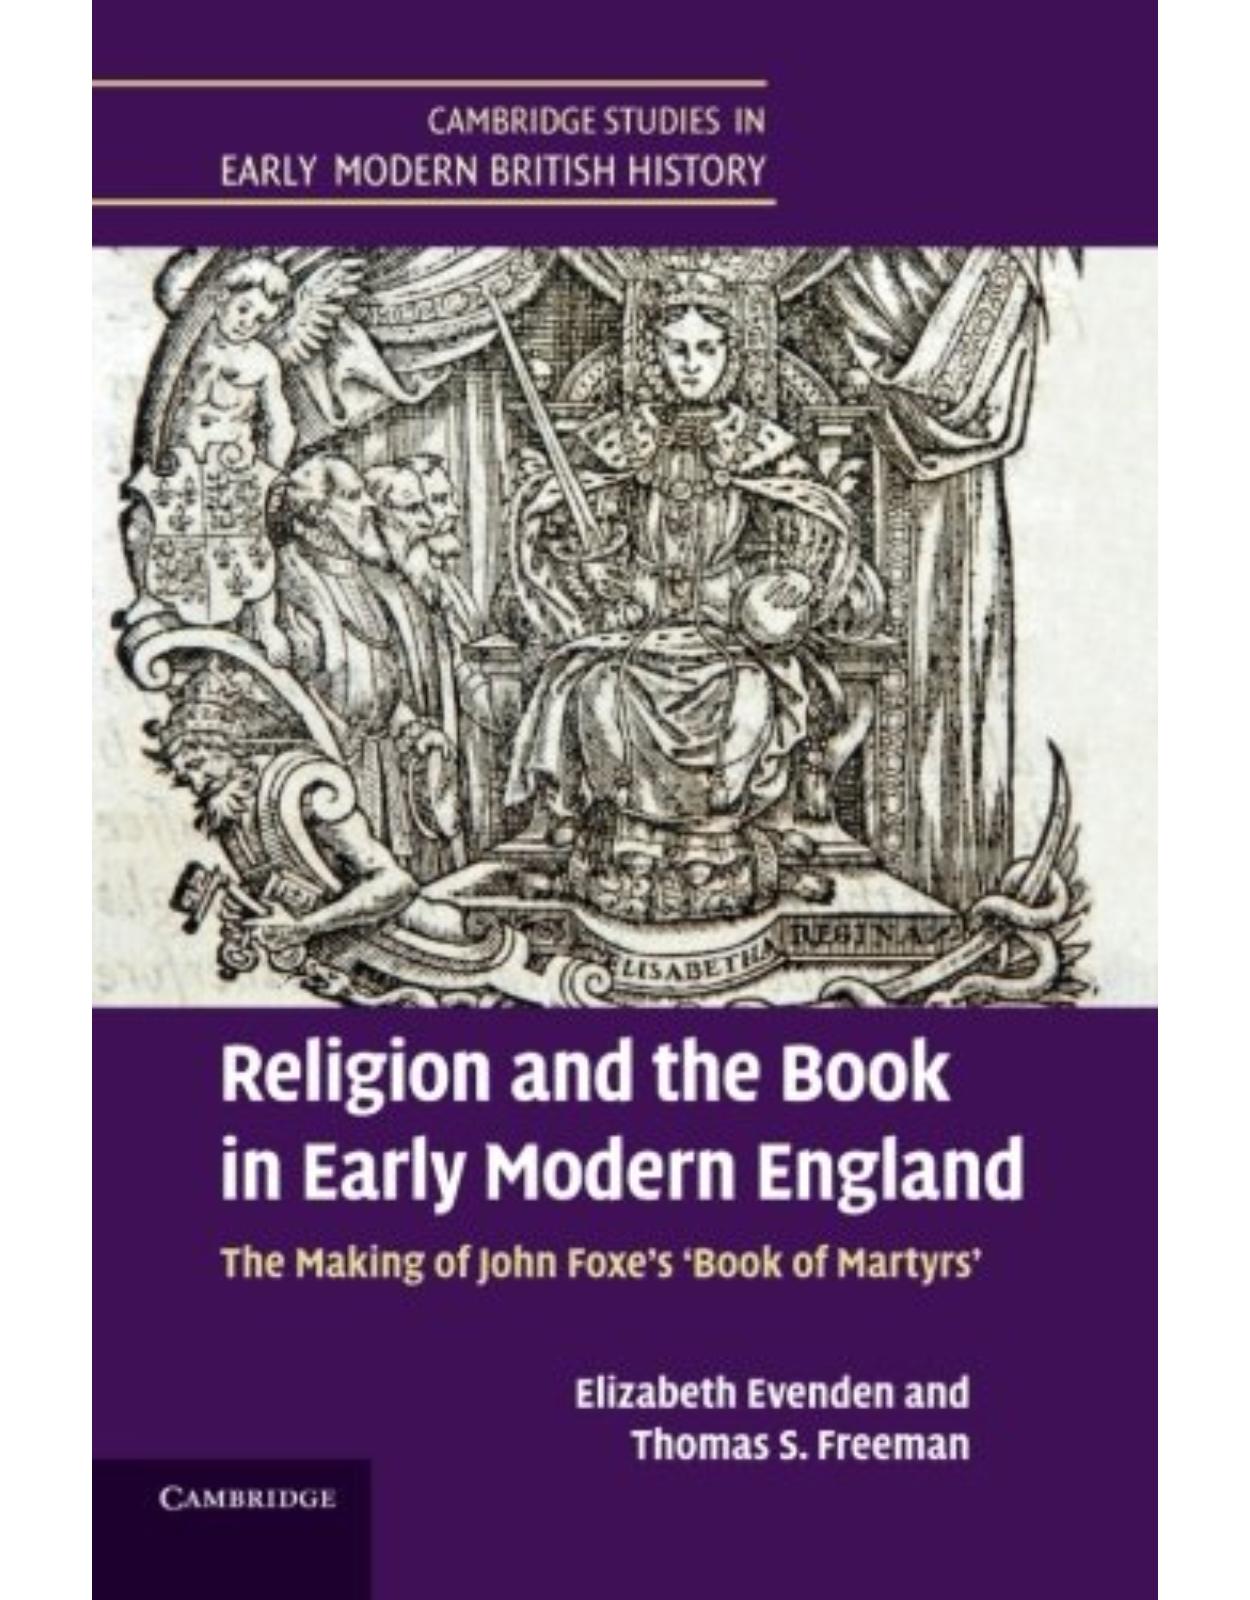 Religion and the Book in Early Modern England: The Making of John Foxe's 'Book of Martyrs' (Cambridge Studies in Early Modern British History)